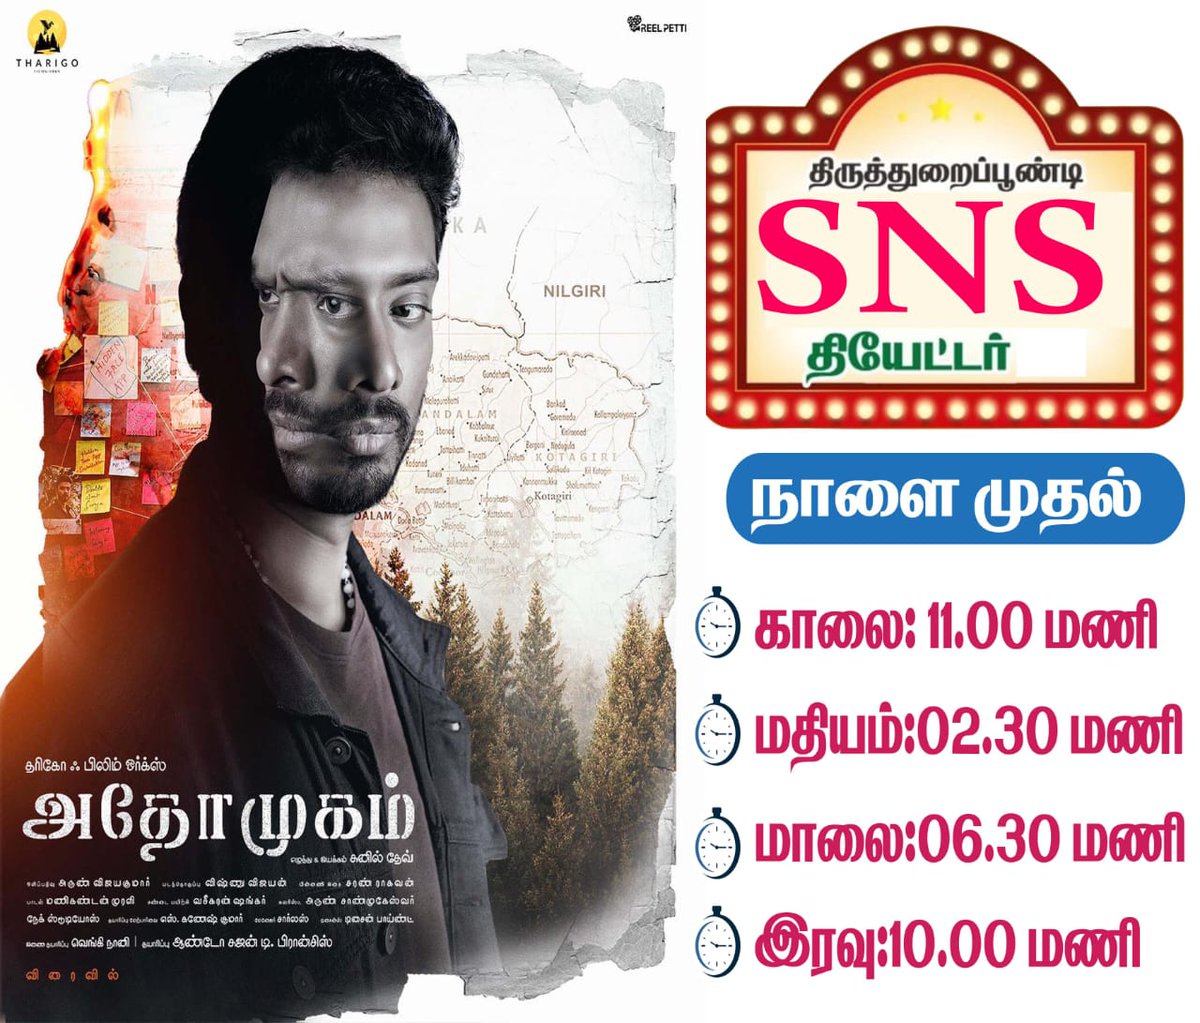 #Adhomugam releasing from tomorrow in Thiruthuraipoondi SNS theater..

Daily 4 shows..